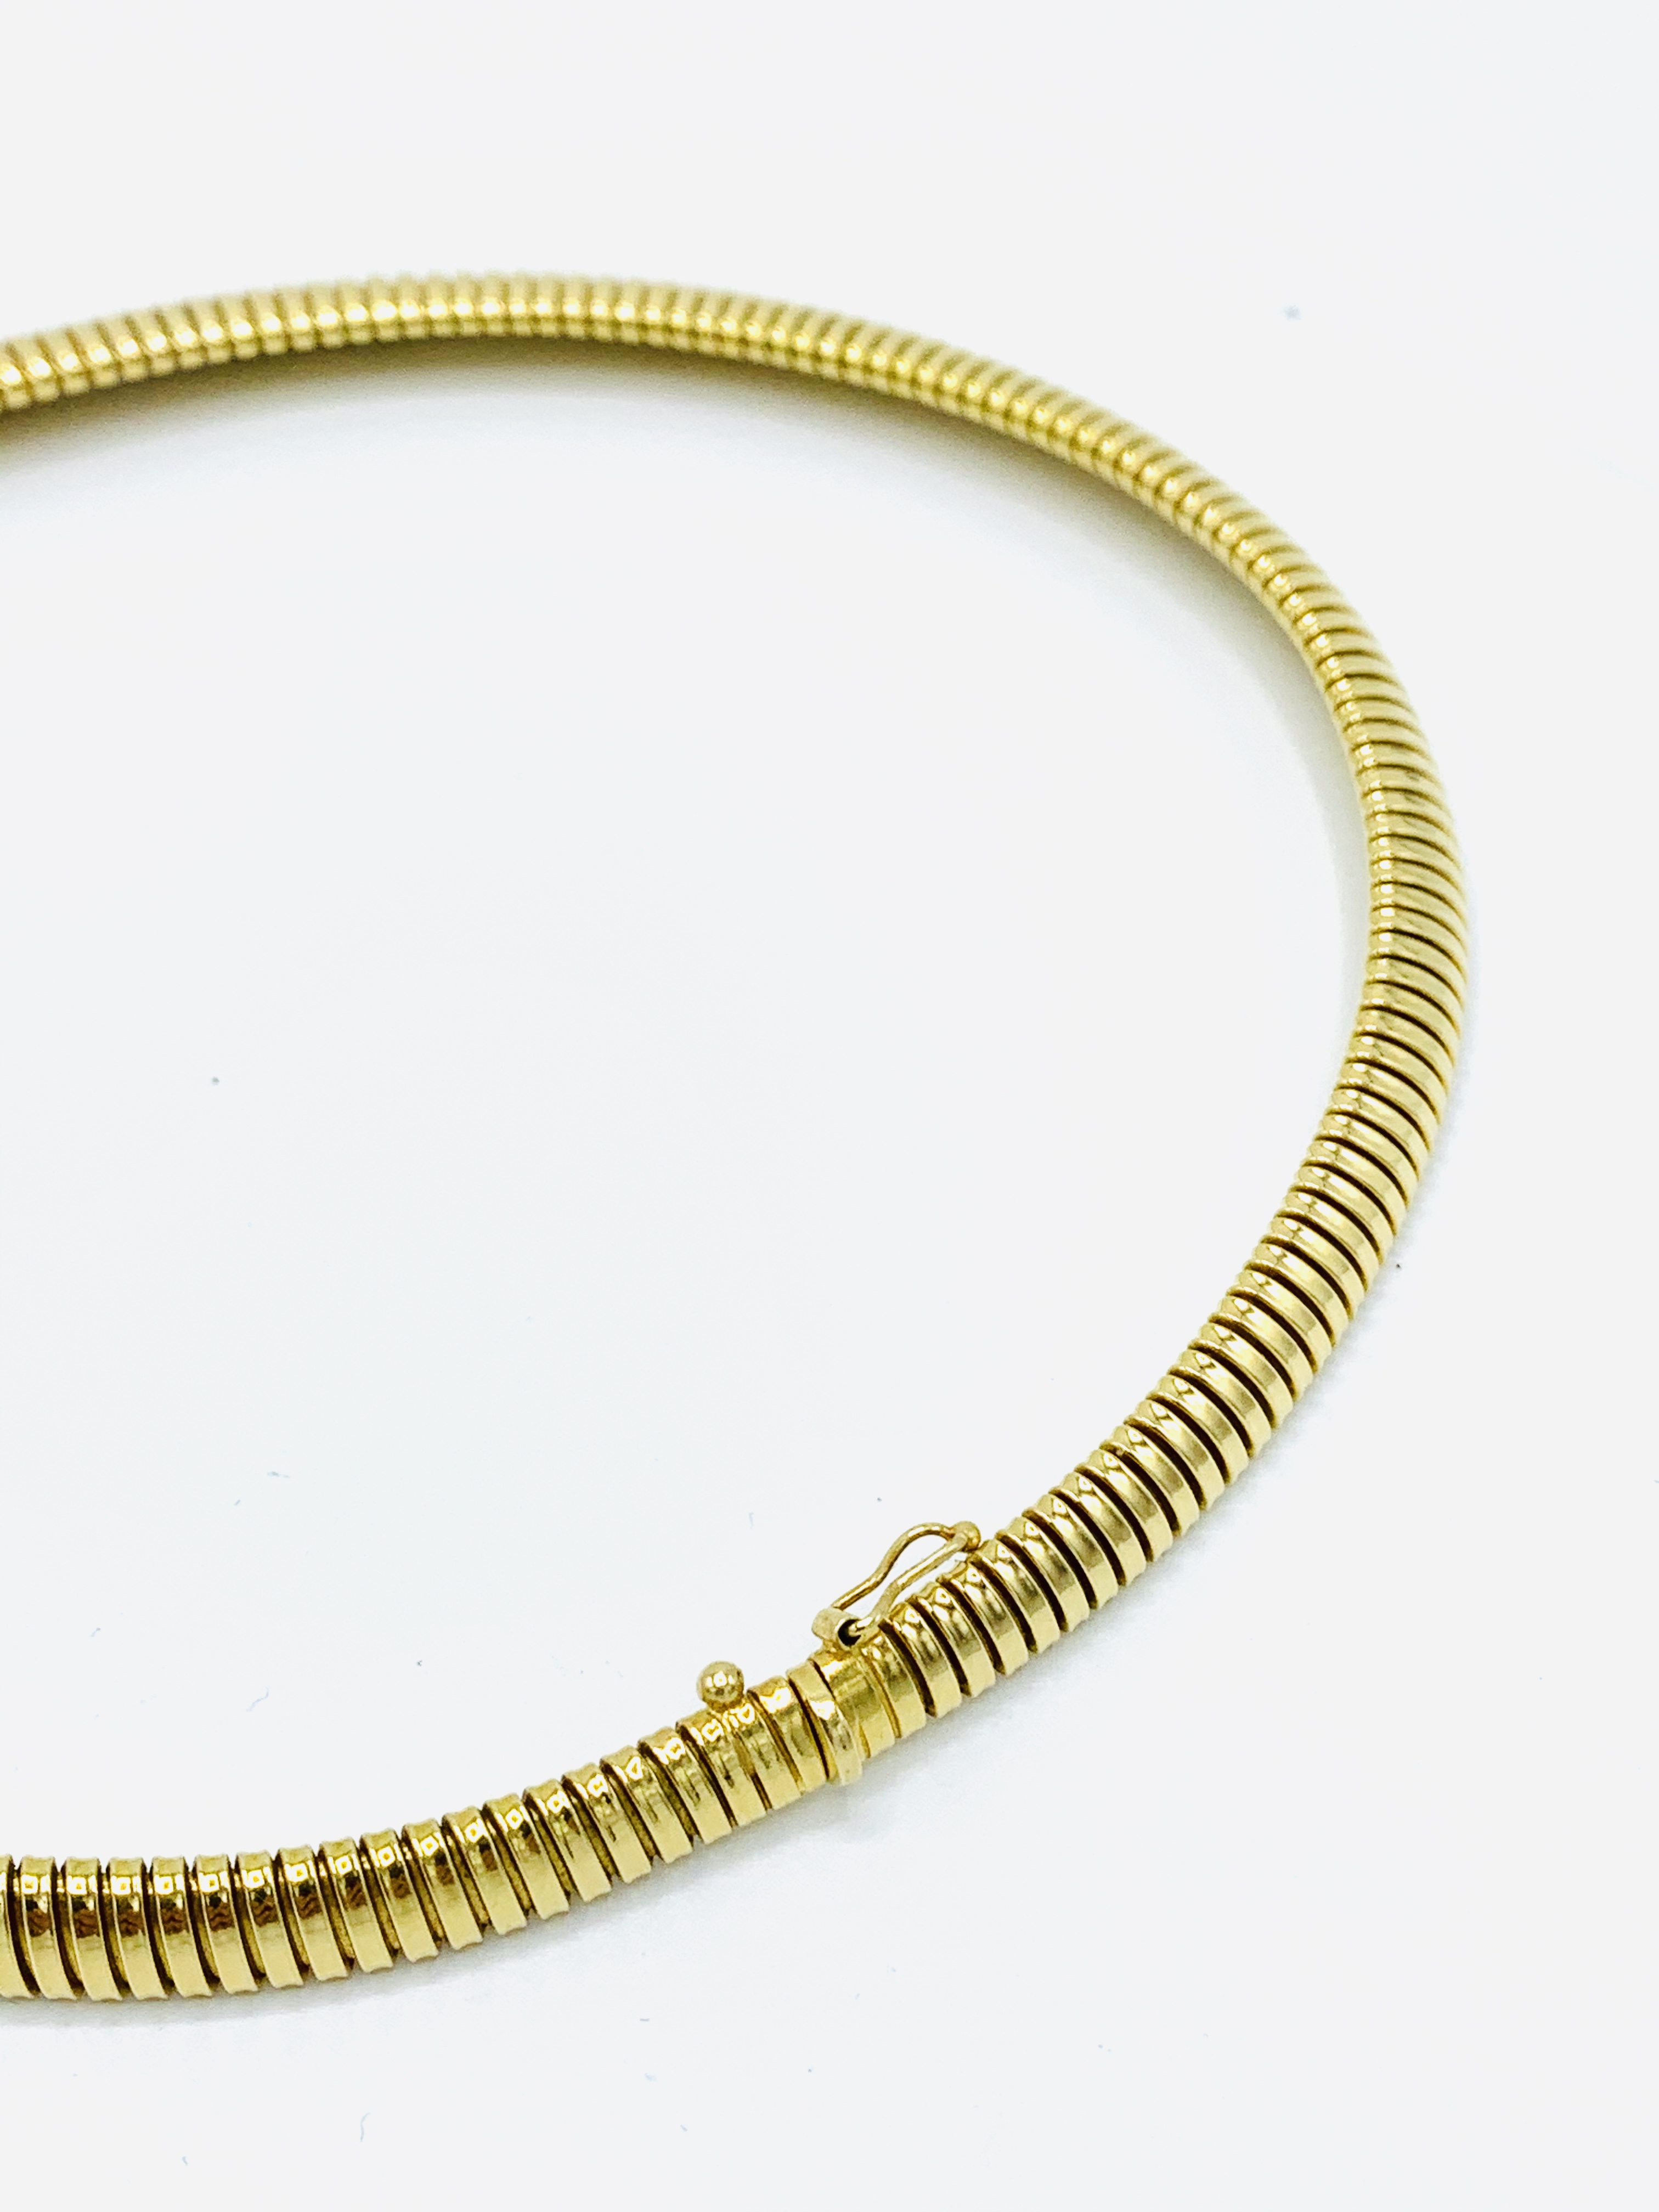 18ct gold turbogaz collar necklace. - Image 6 of 6